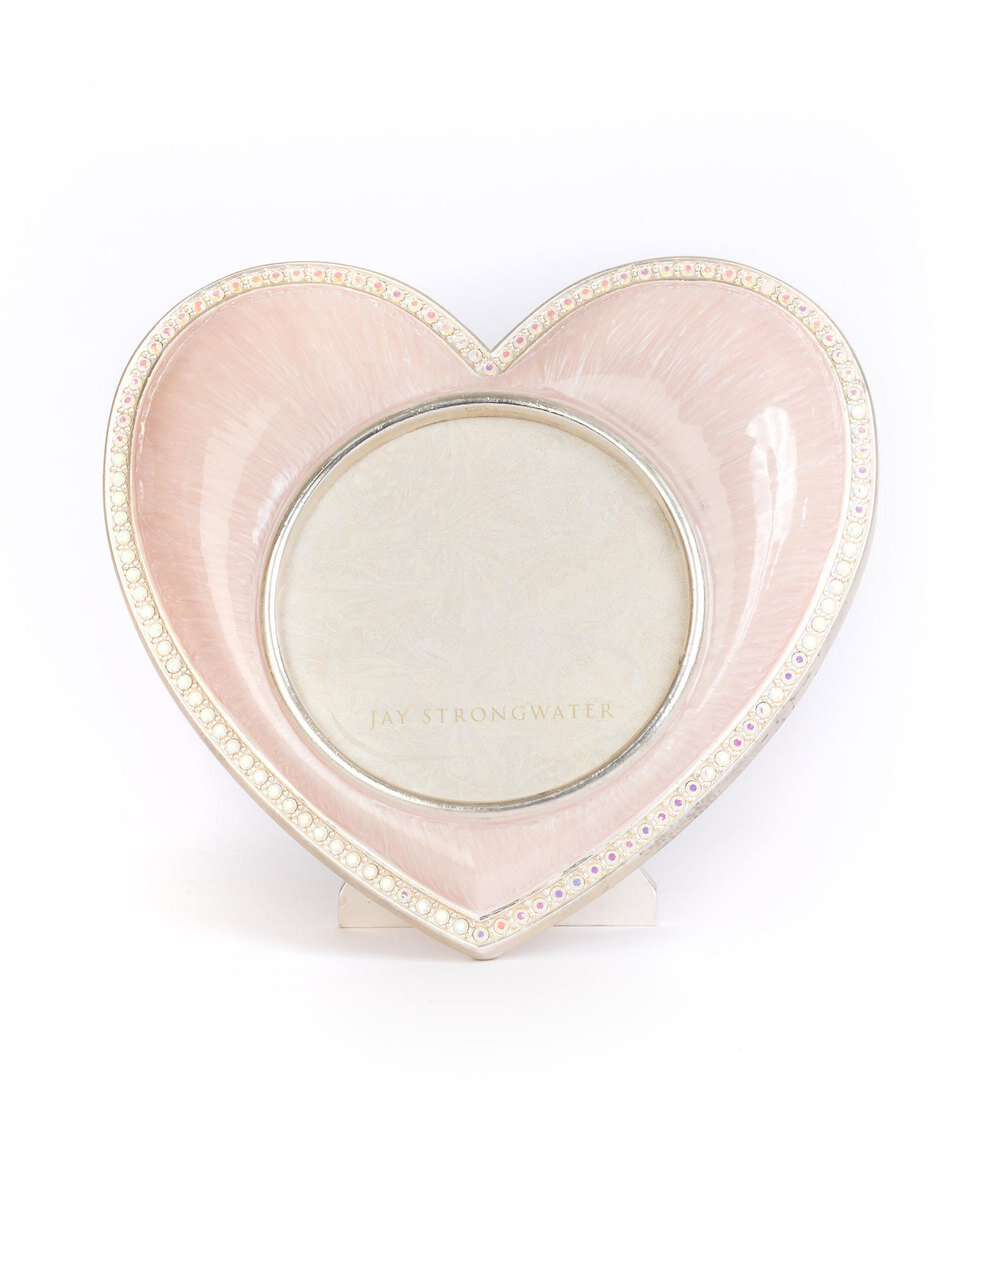 Jay Strongwater Chantal Heart Frame Pale Pink SPF5809-606